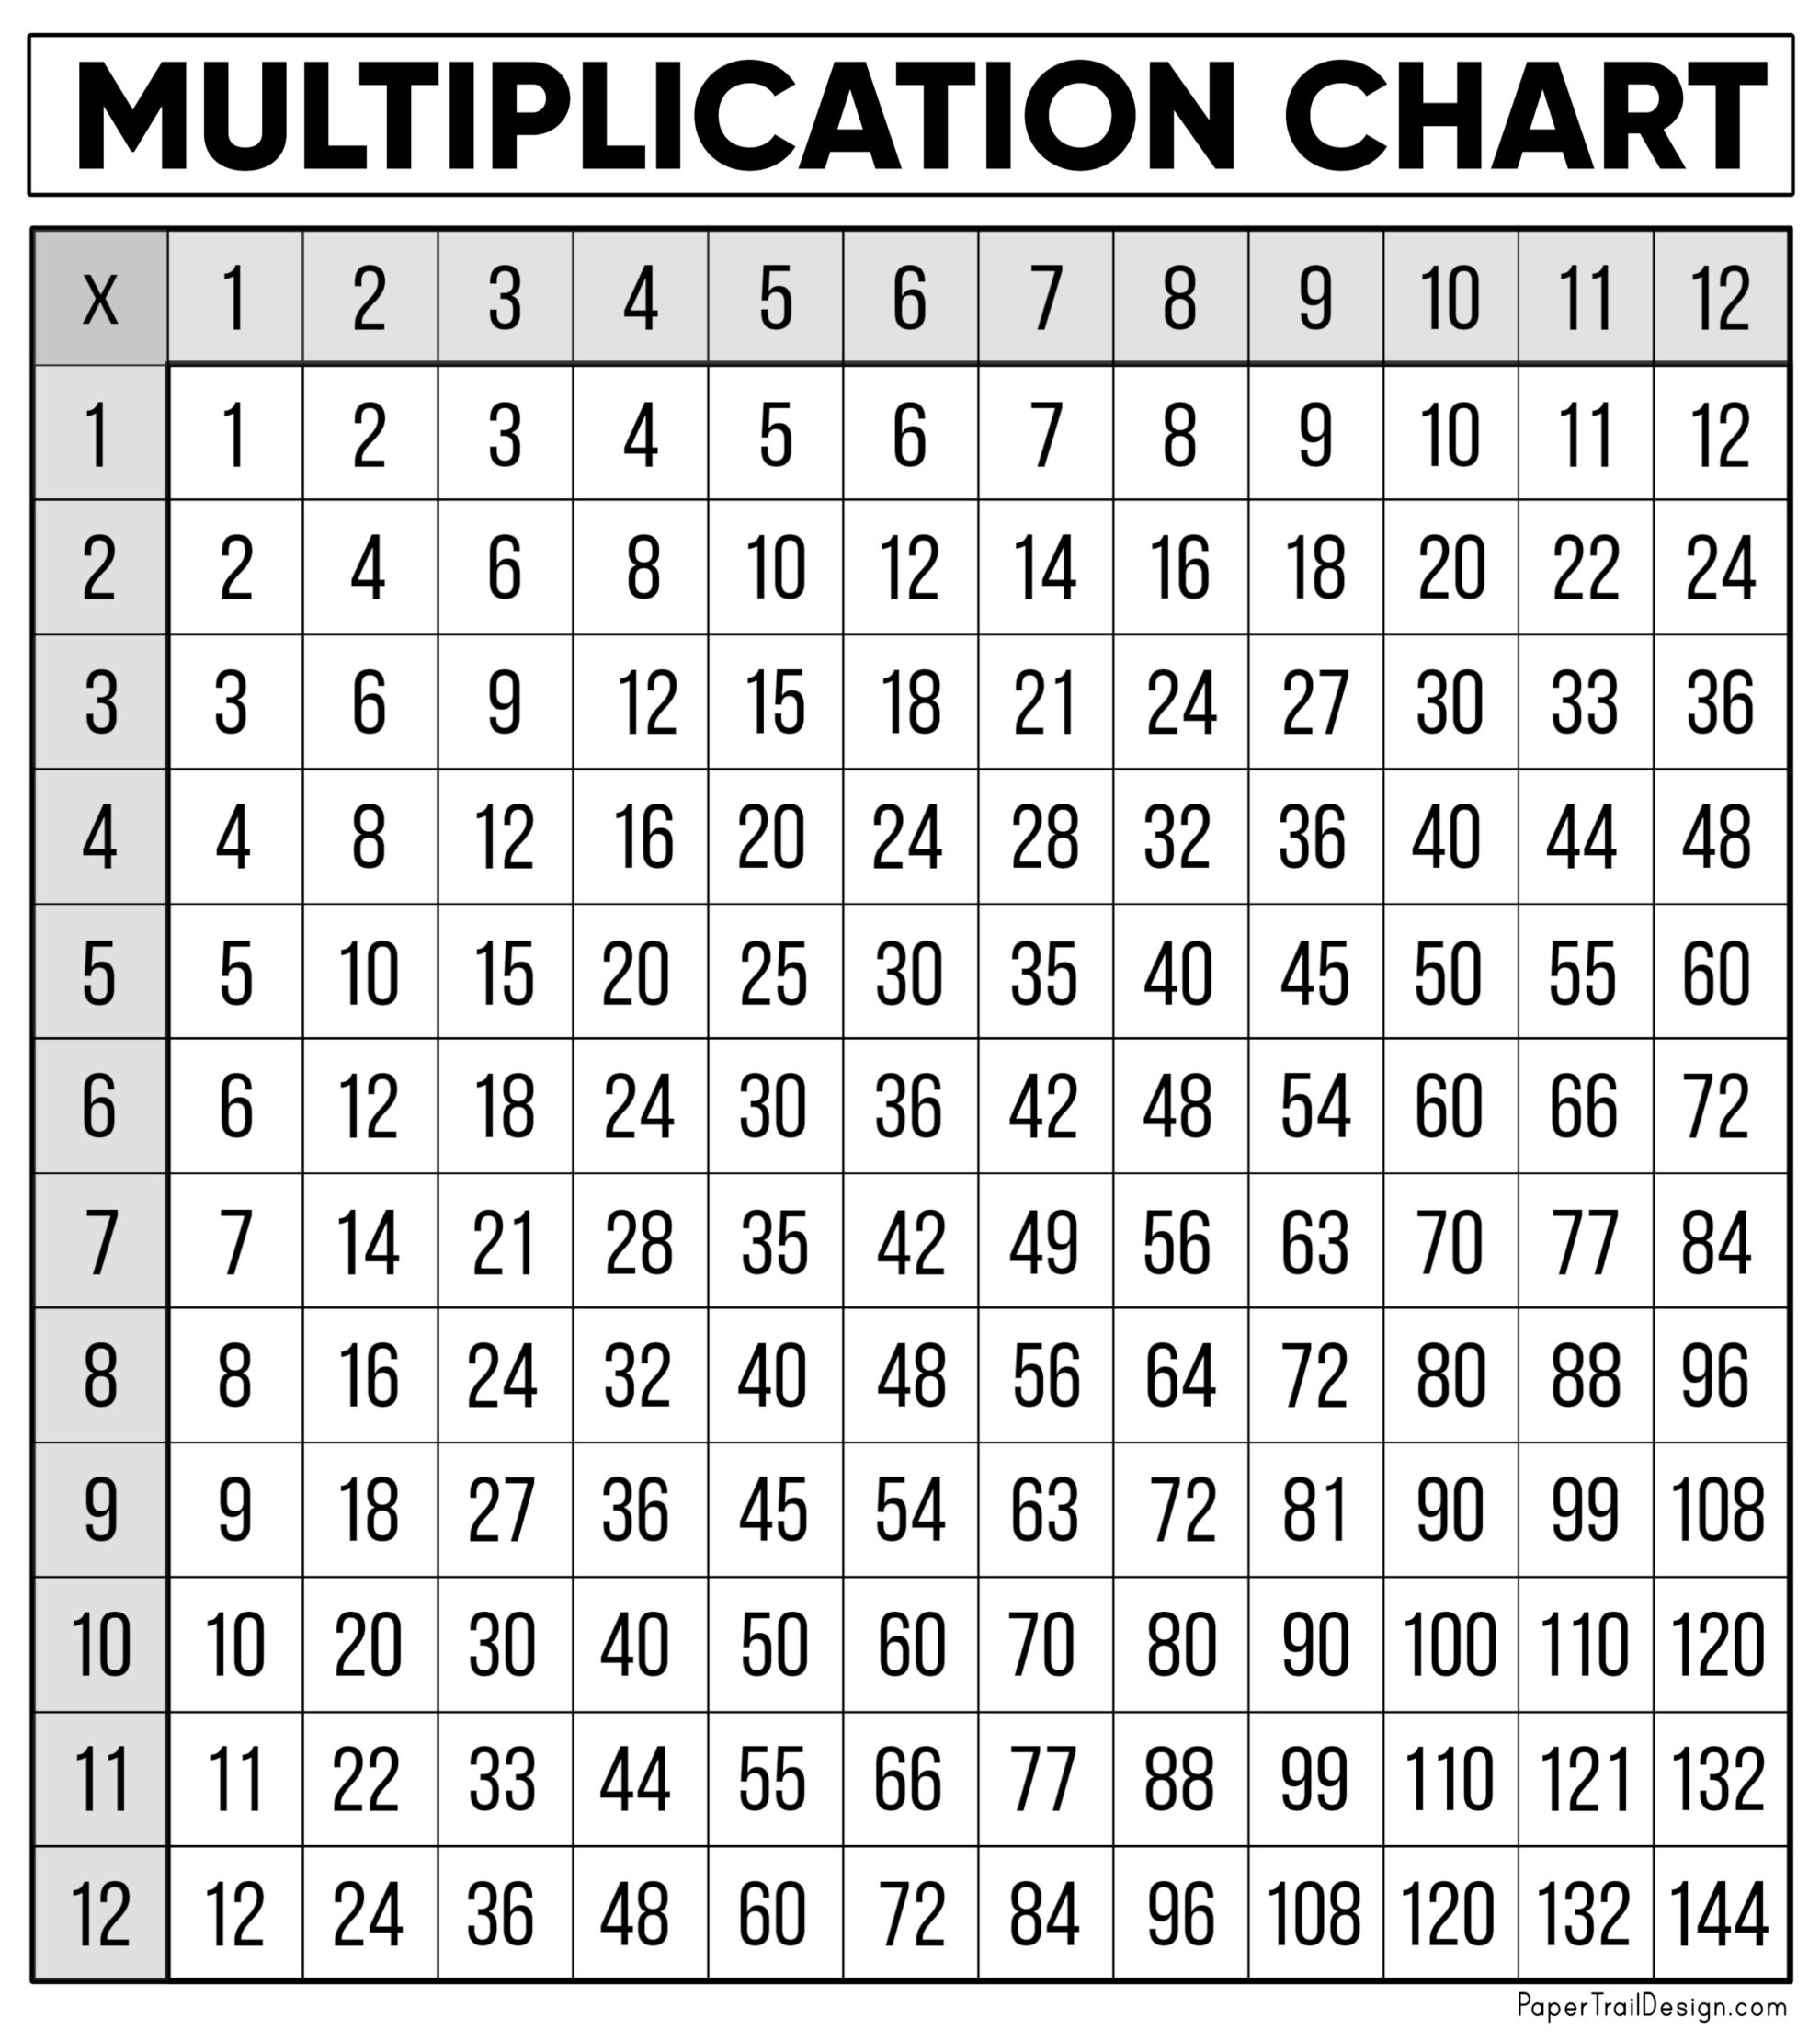 Free Multiplication Chart Printable - Paper Trail Design throughout Free Printable Math Multiplication Charts